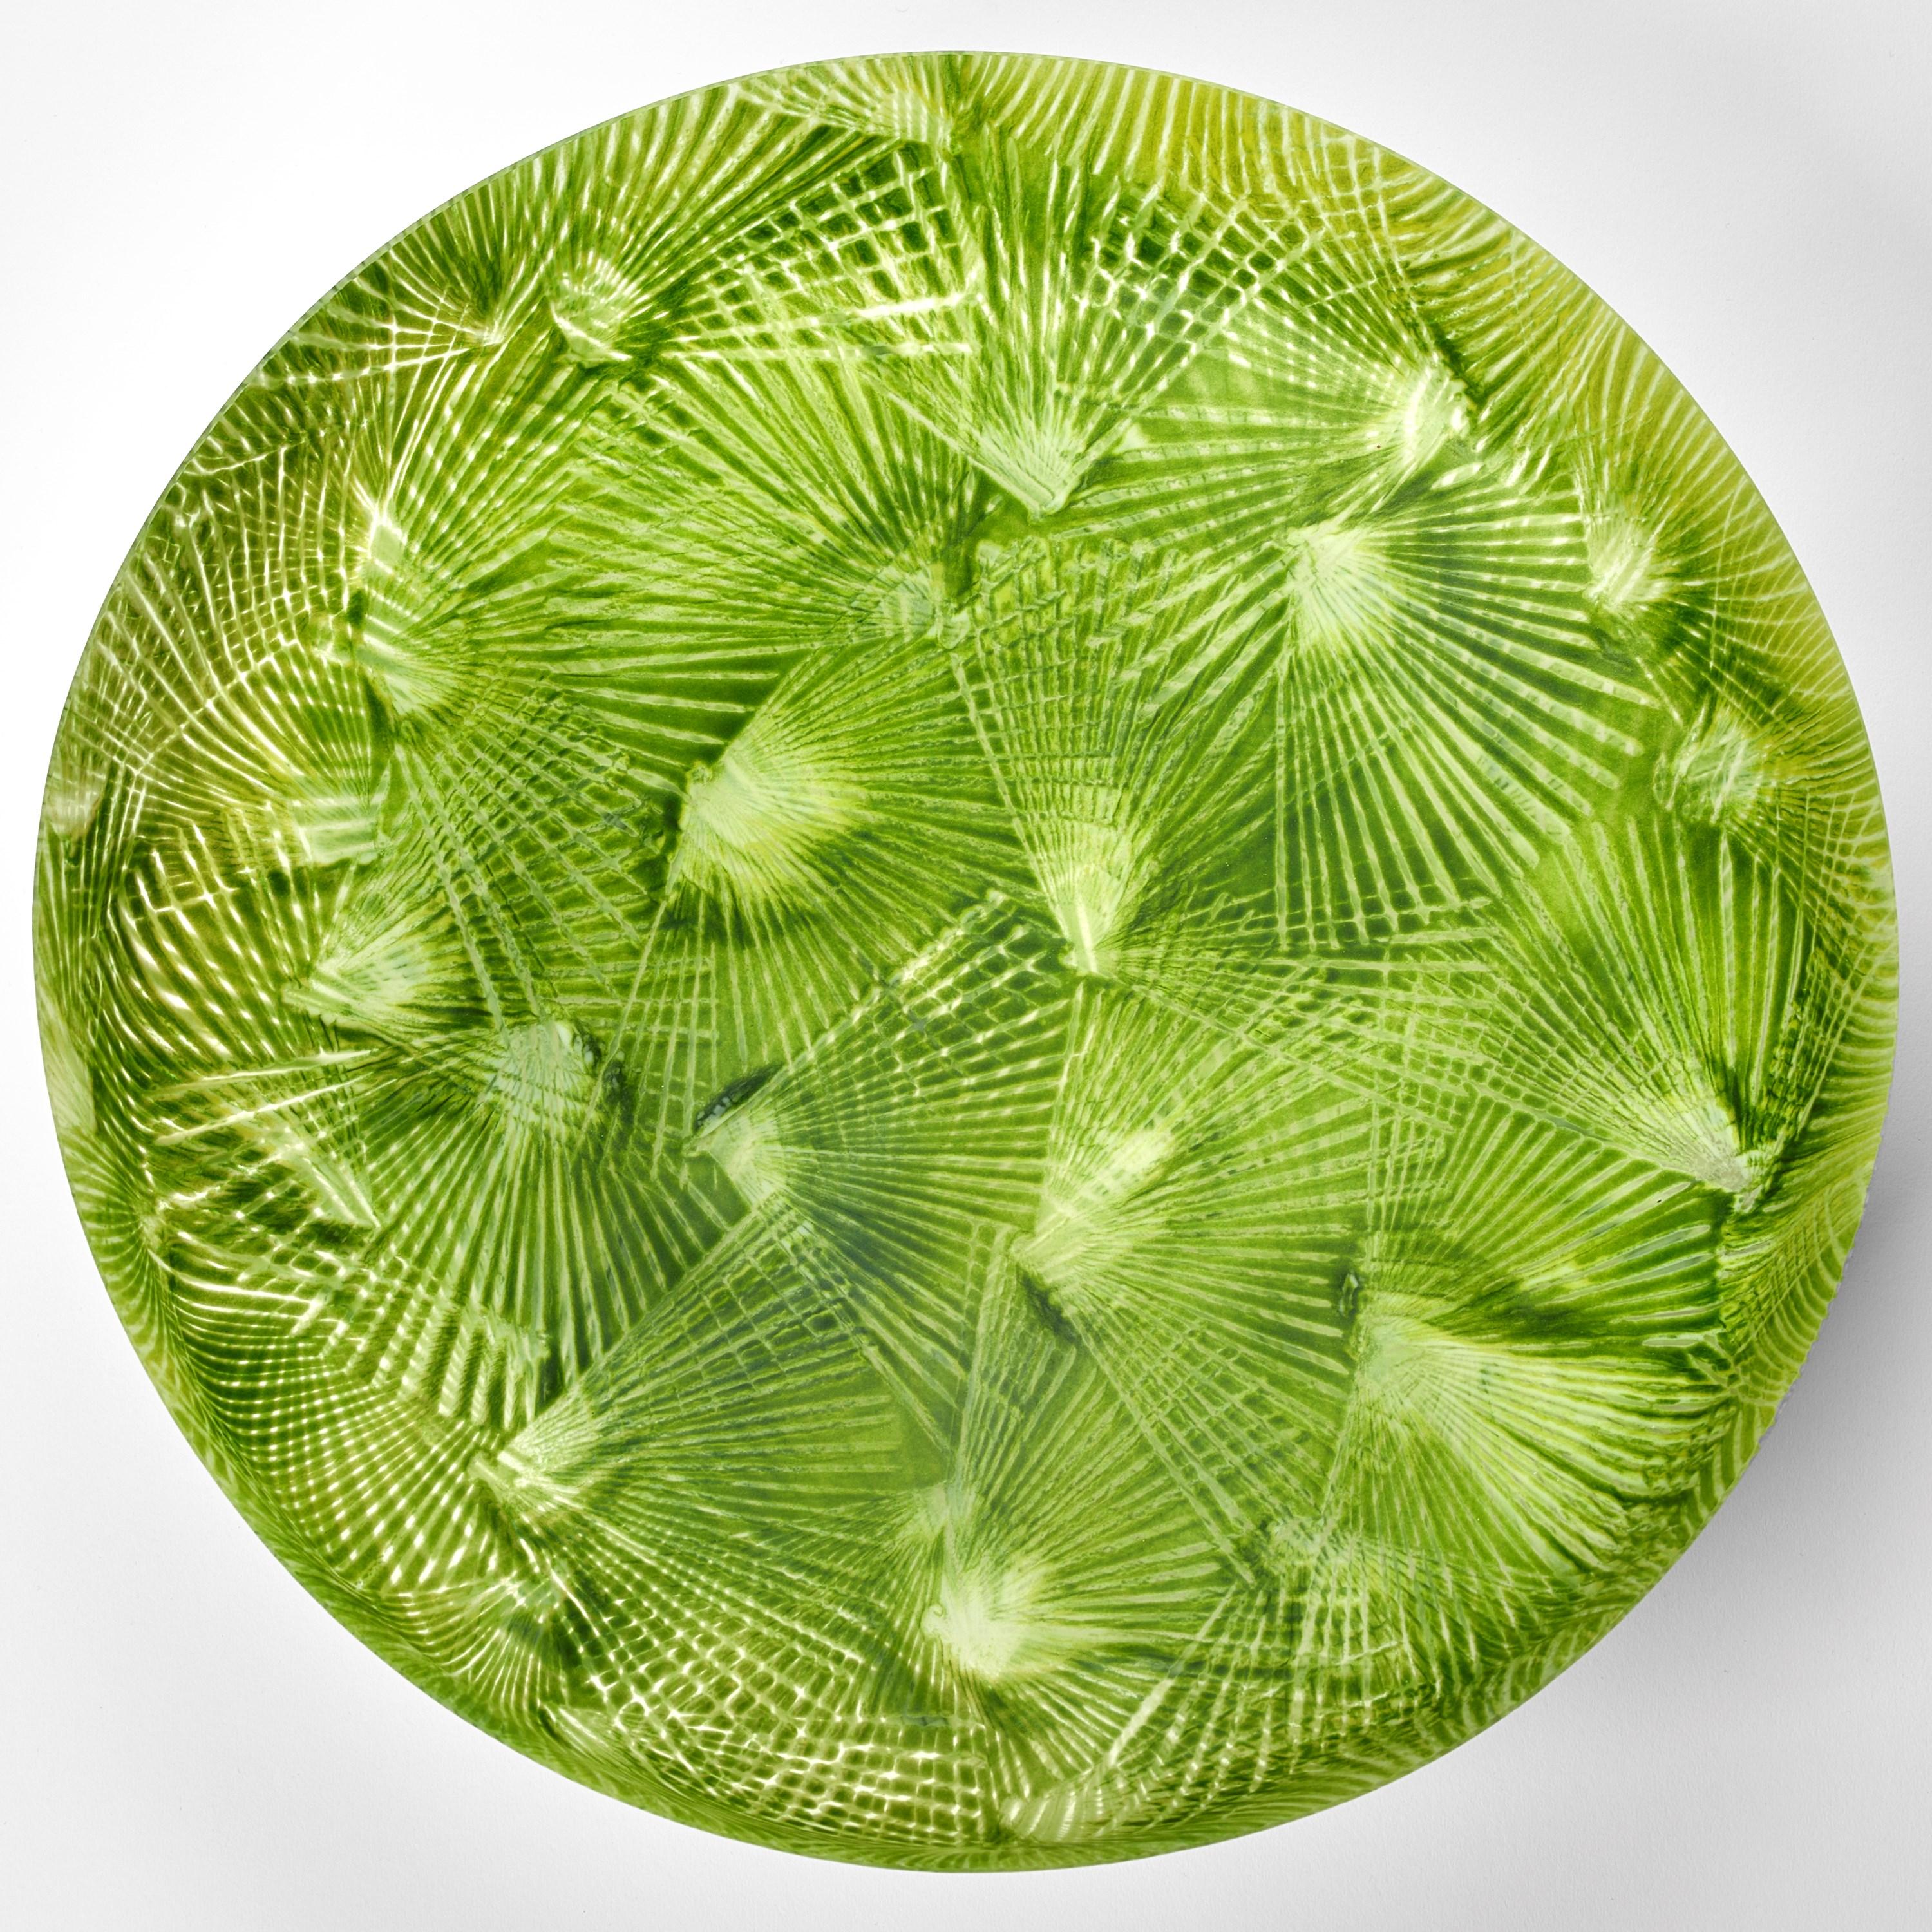 Hand-Crafted Taubate, a vibrant green textured glass centrepiece by Amanda Simmons